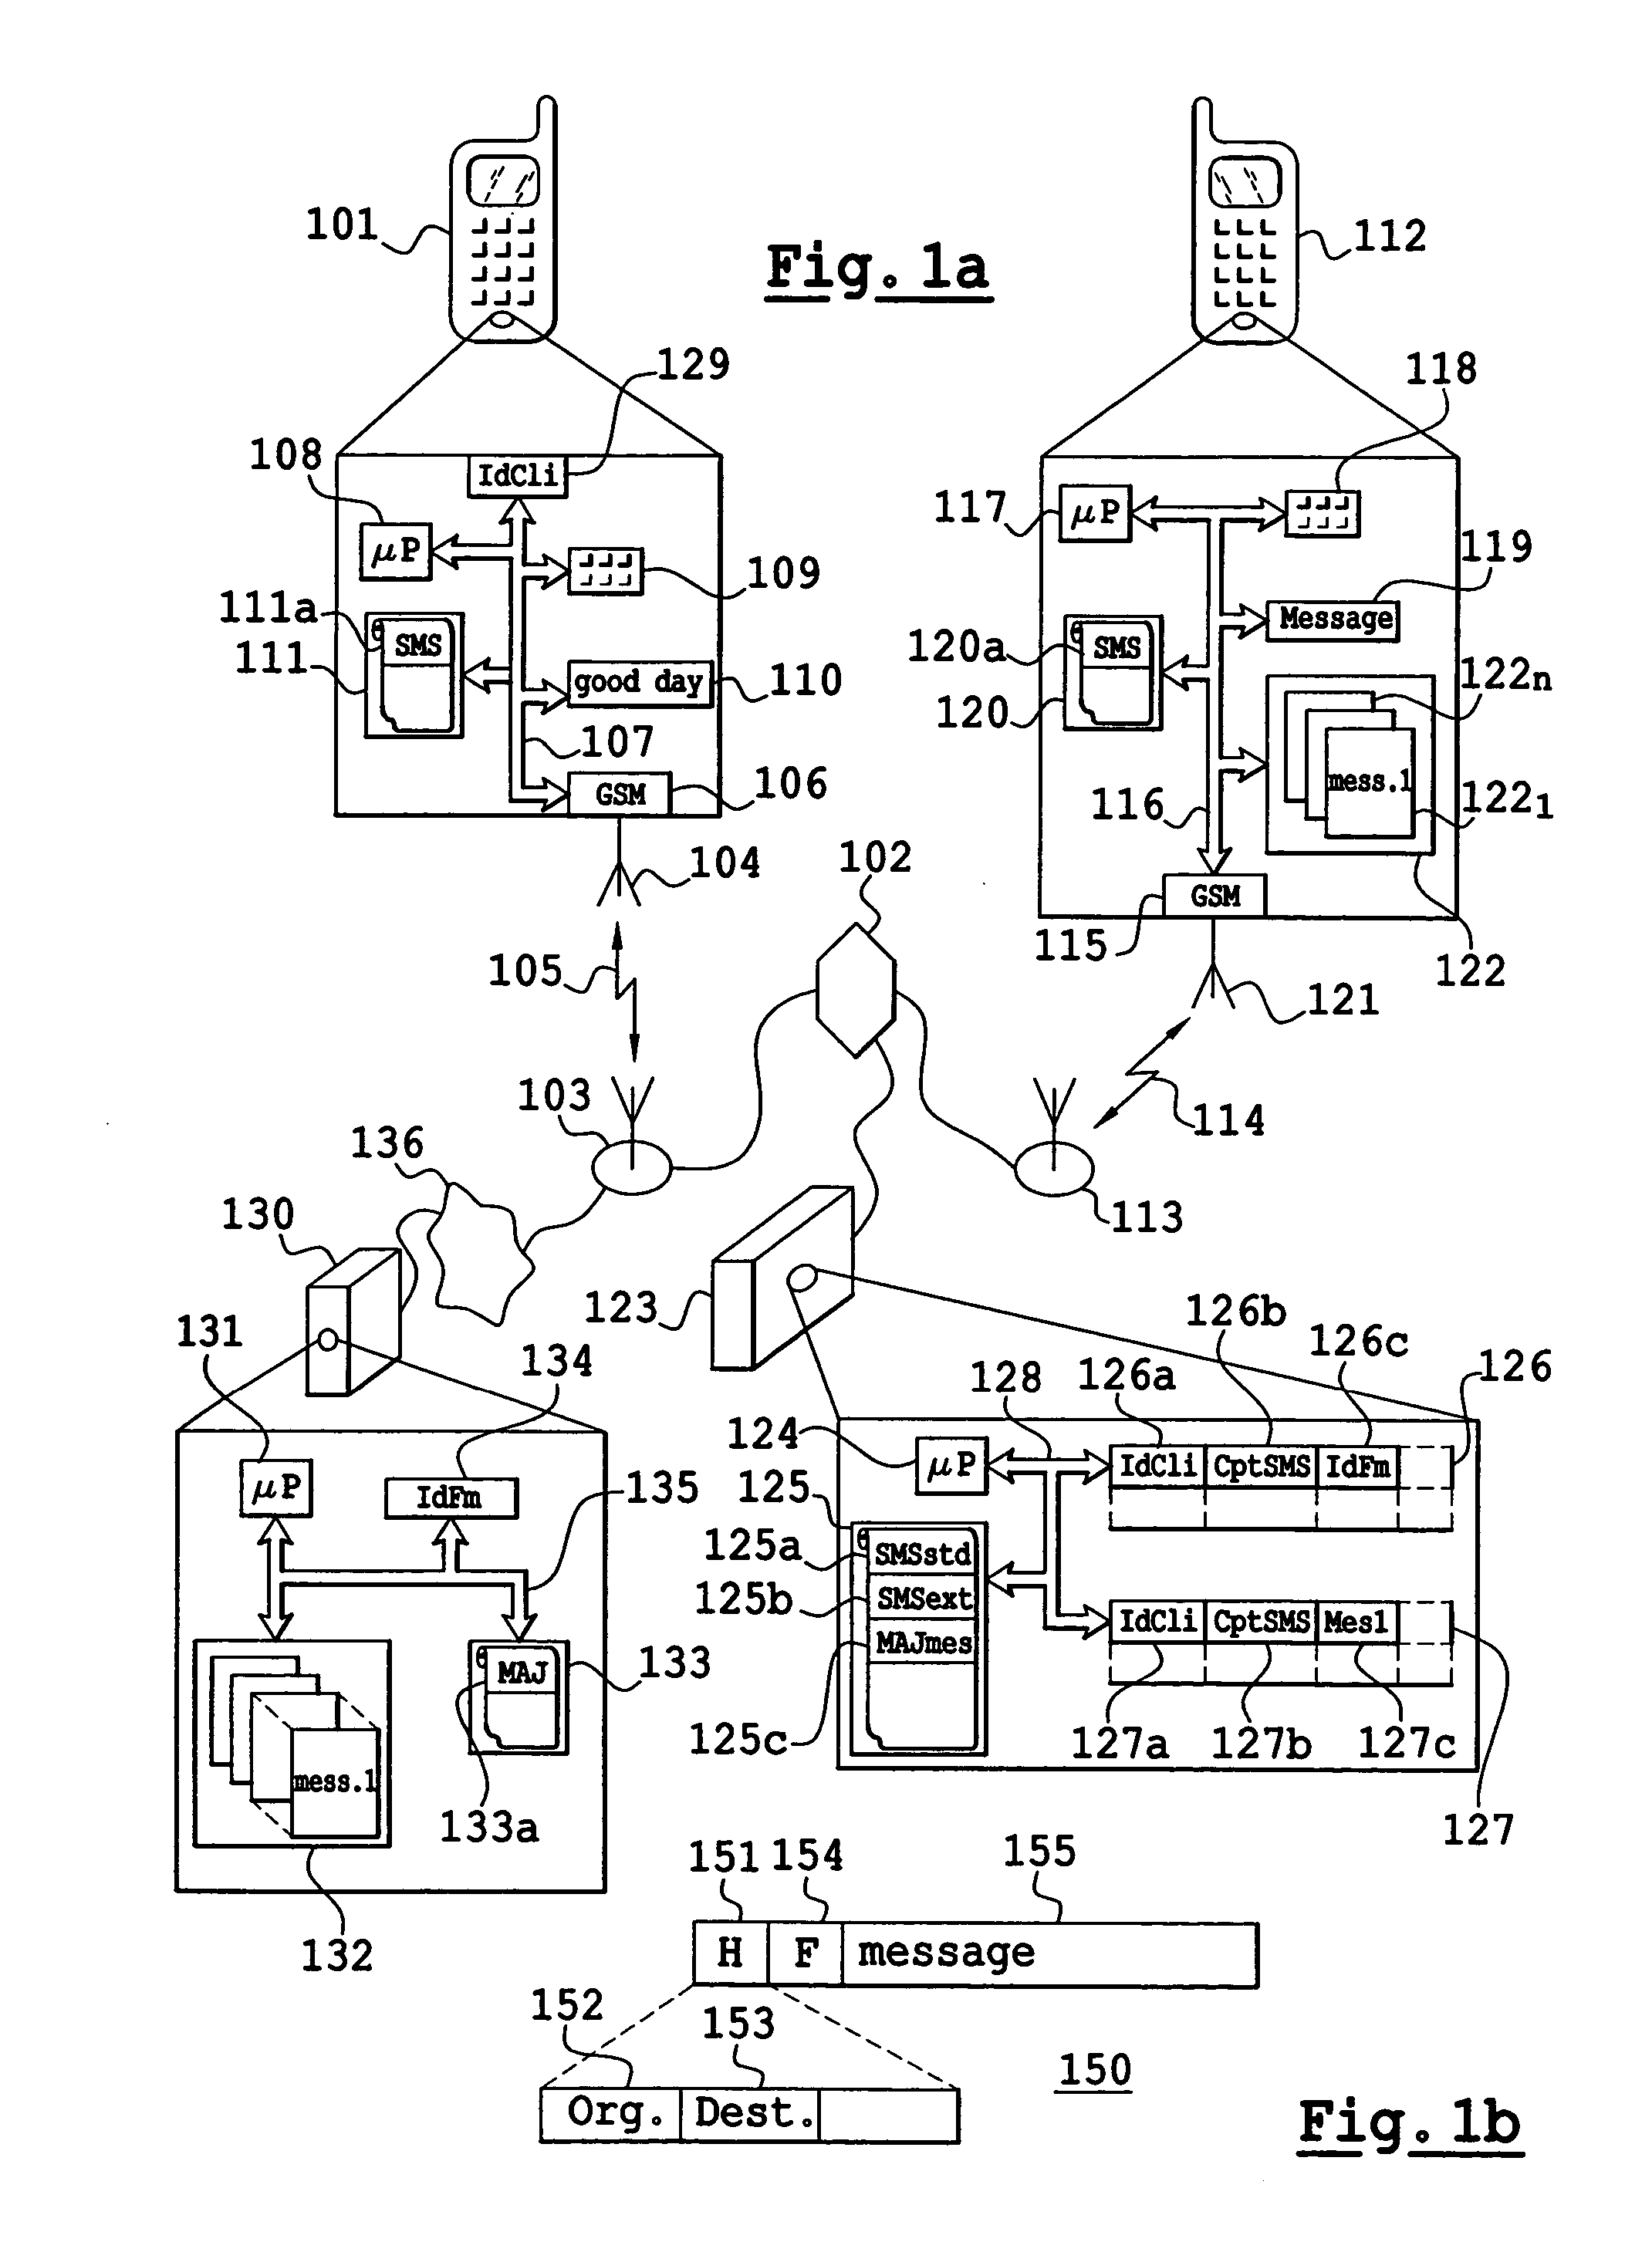 Method for routing electronic messages